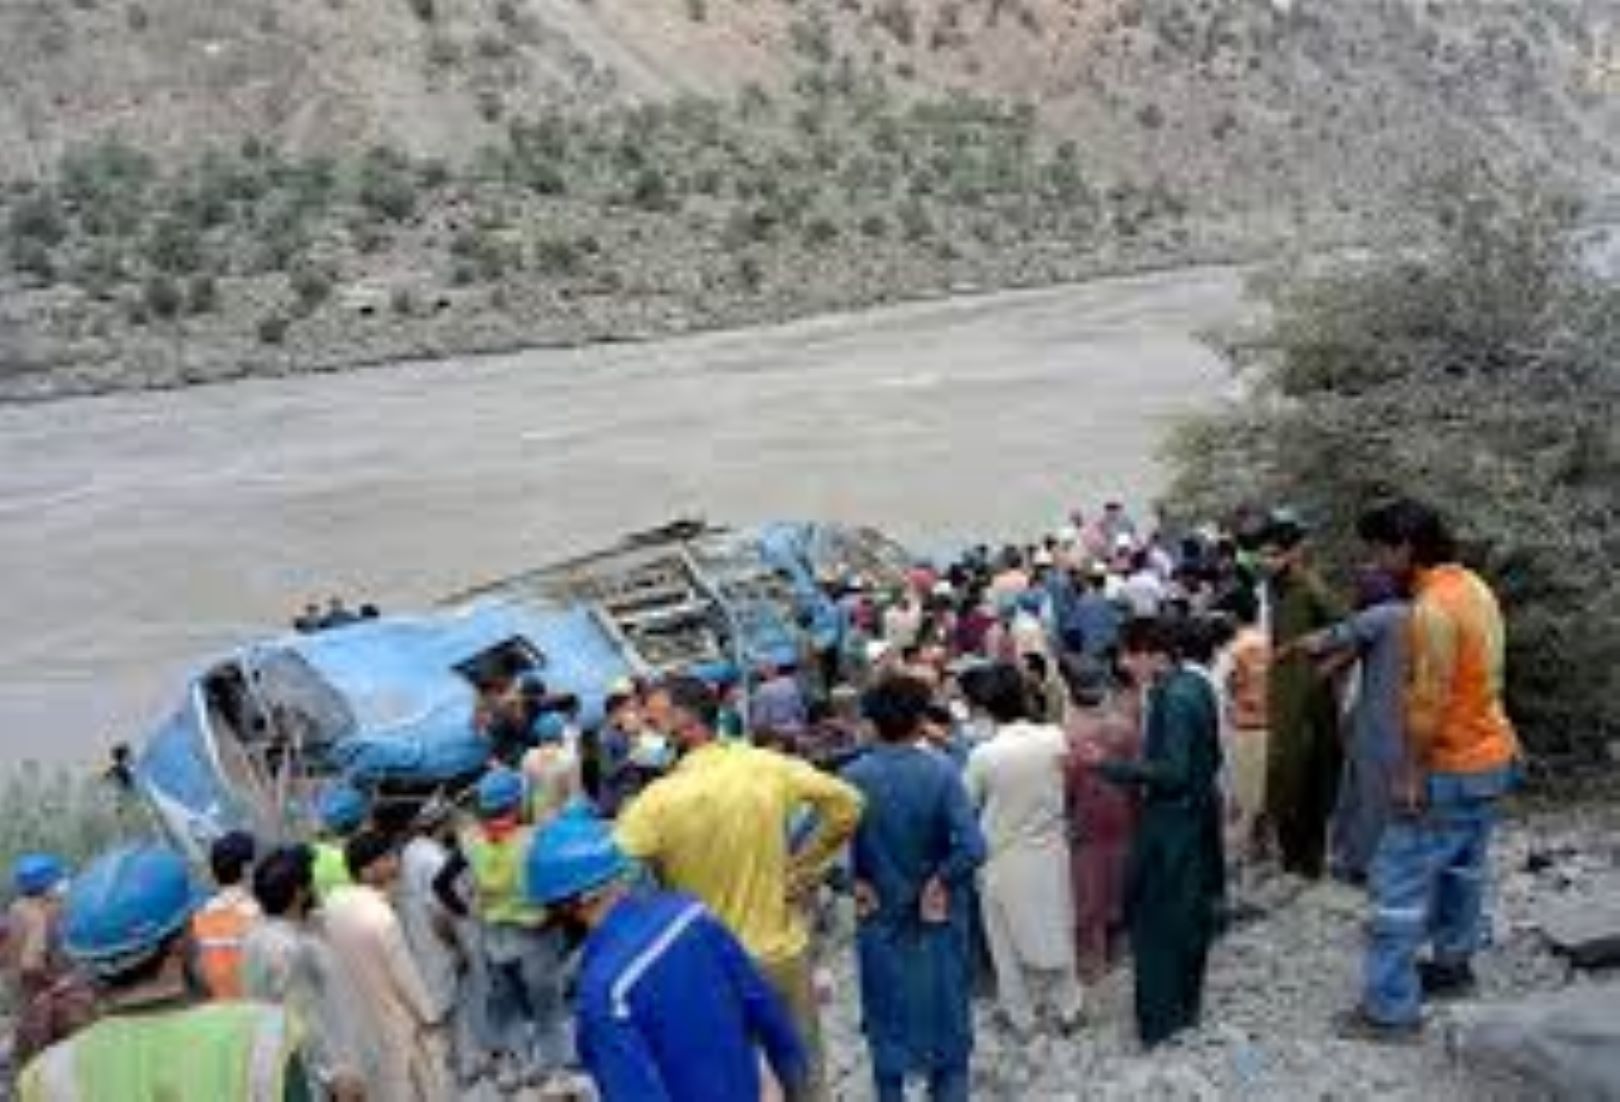 13 Killed As Bus Fell Into Ravine In Pakistan